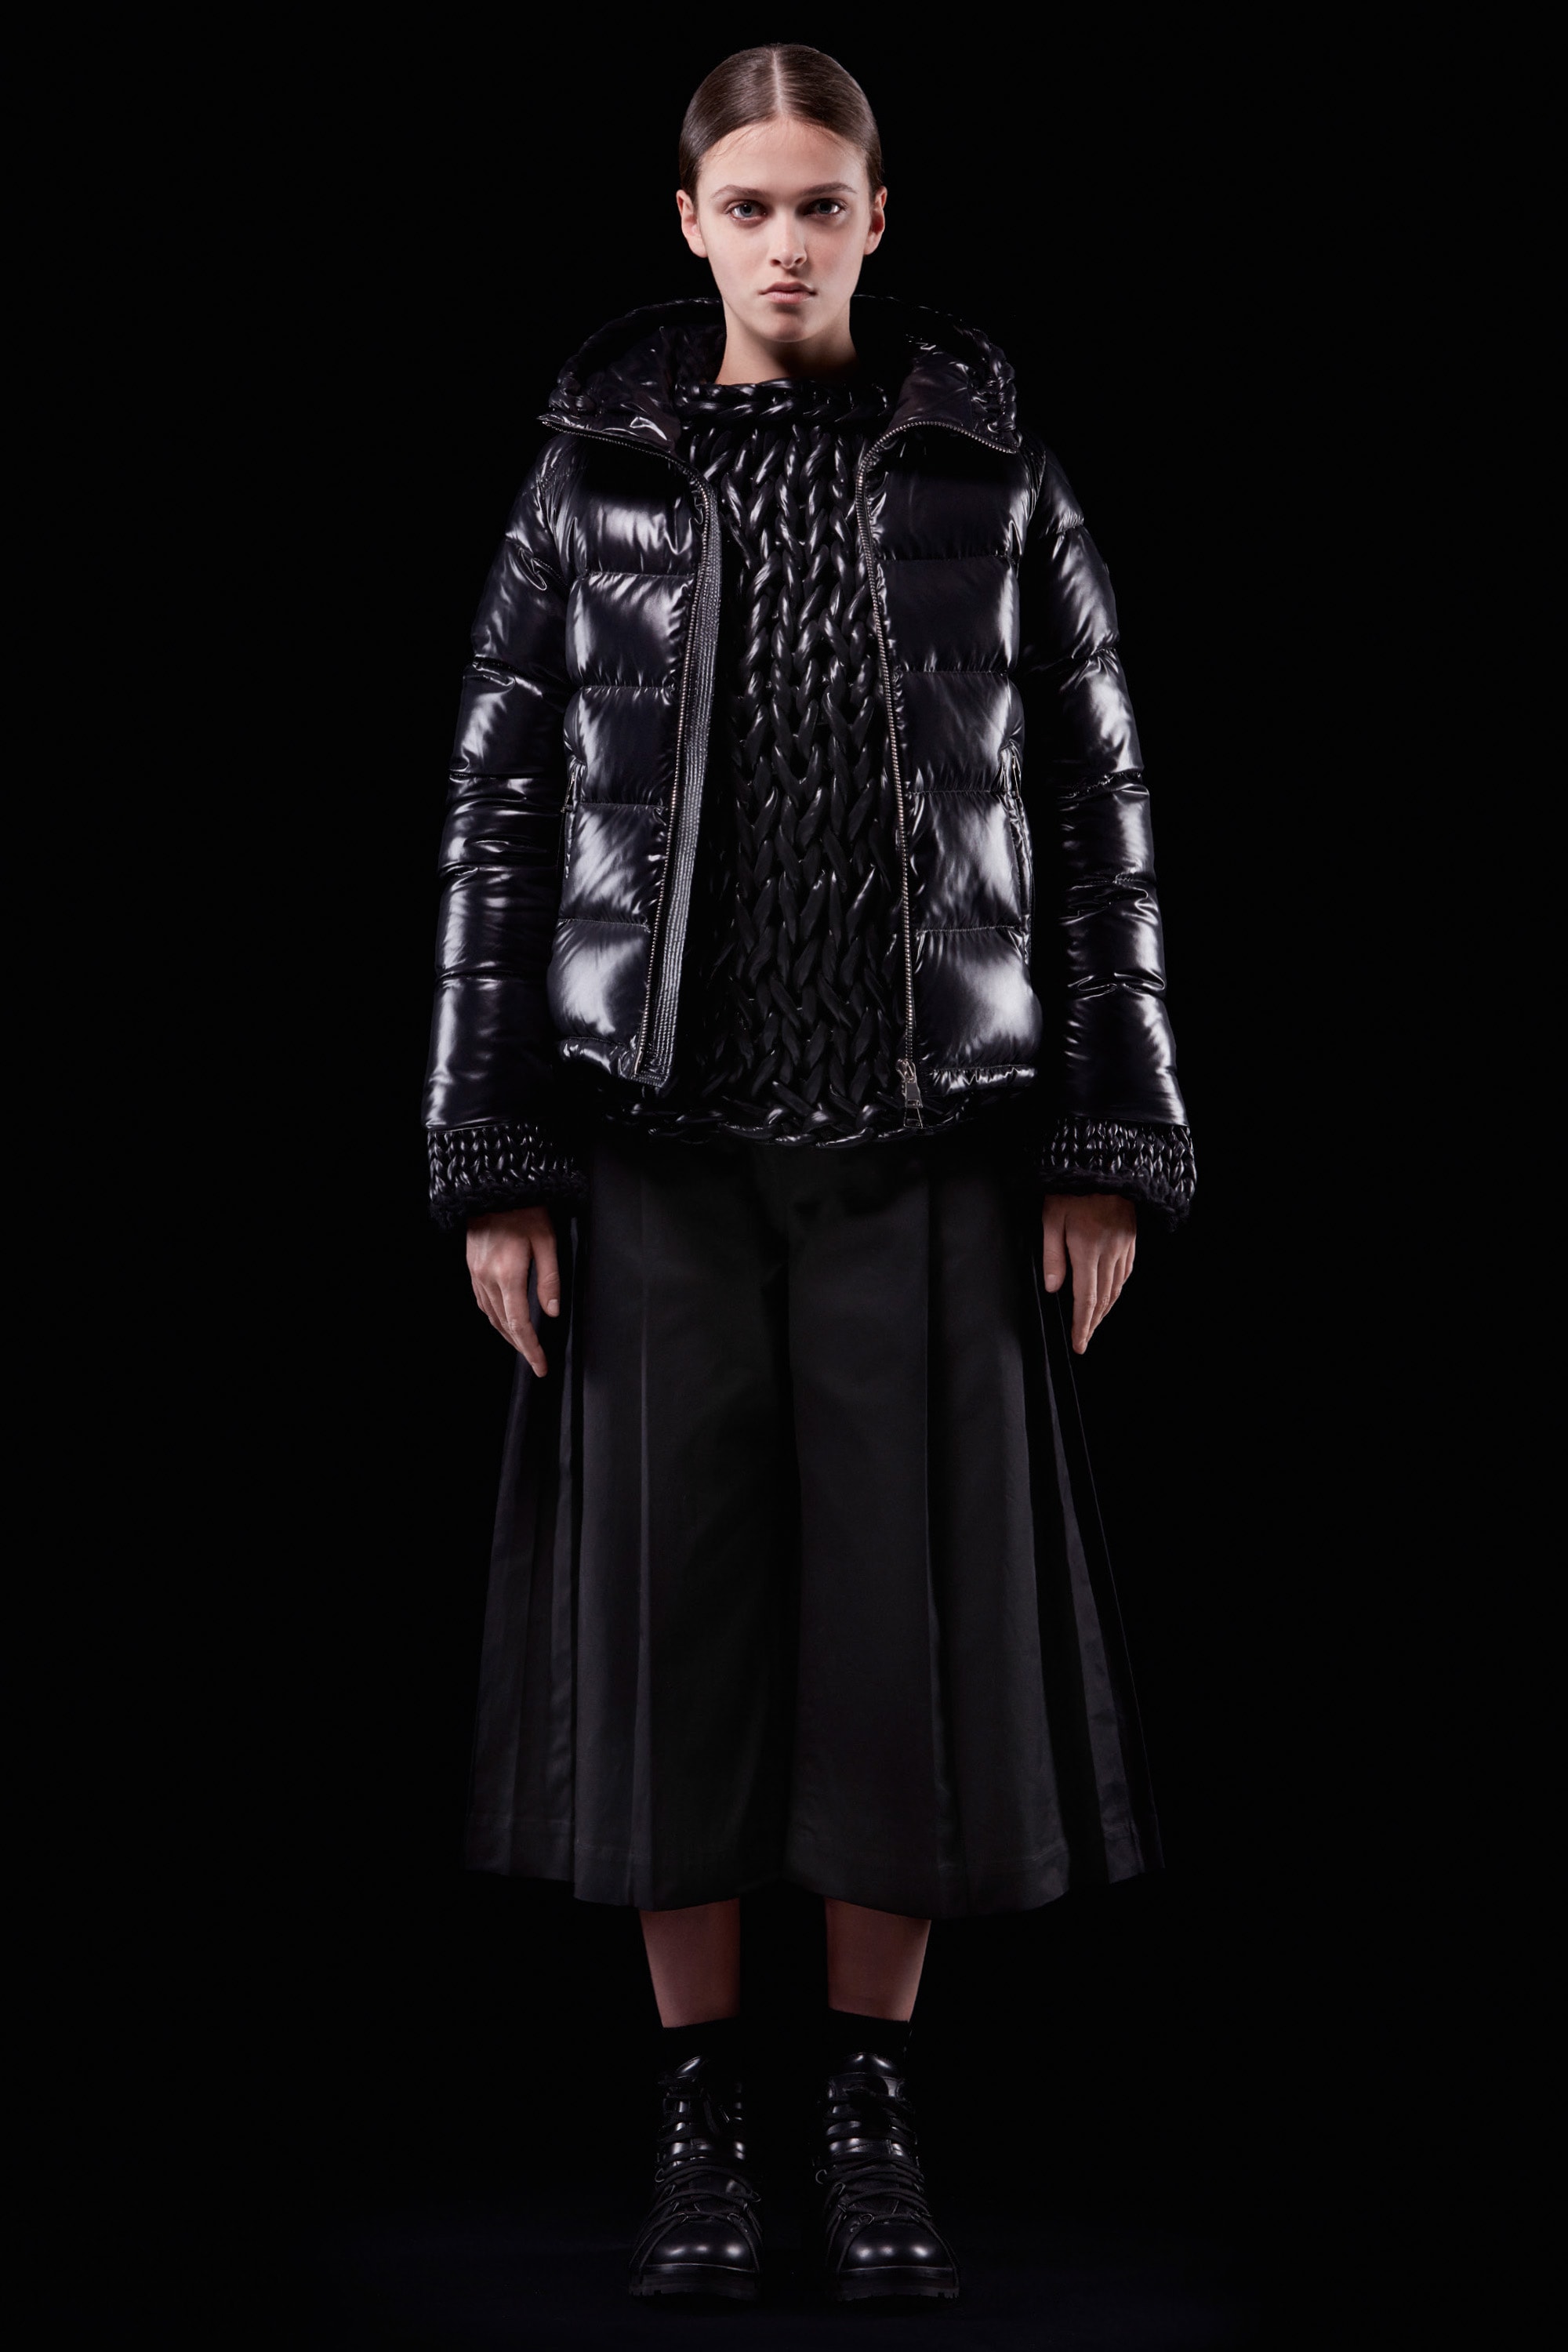 Moncler Noir Kei Ninomiya collaboration 6 genius lookbook collection full closer look official july 25 2018 drop release date launch buy purchase sale sell dover street market